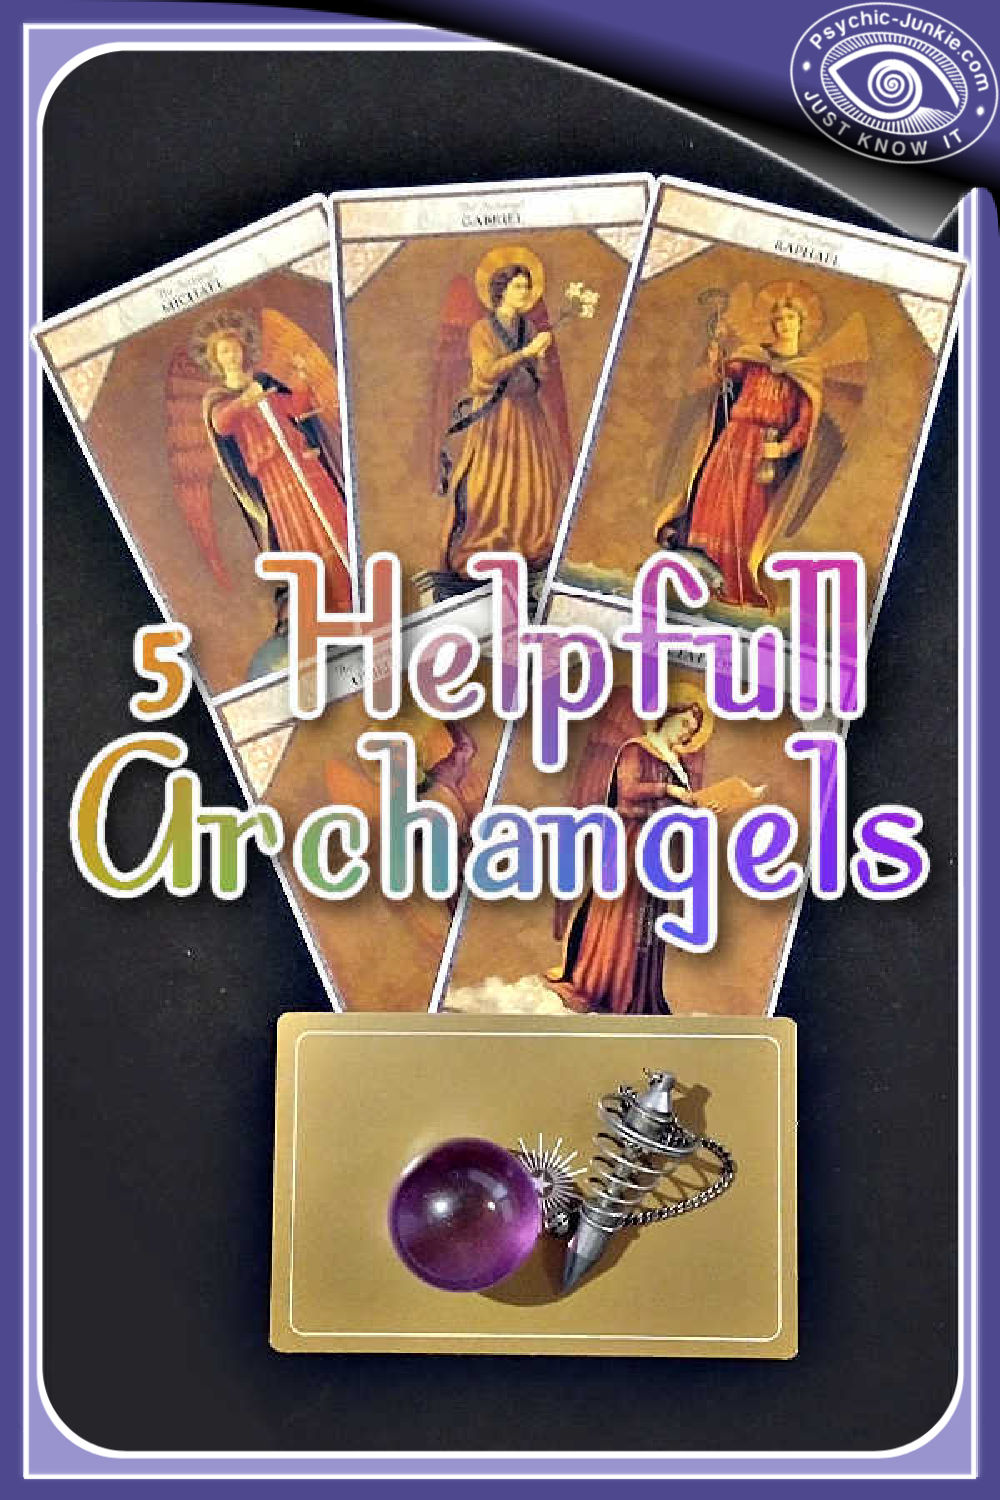 The Fab 5 Archangel Names